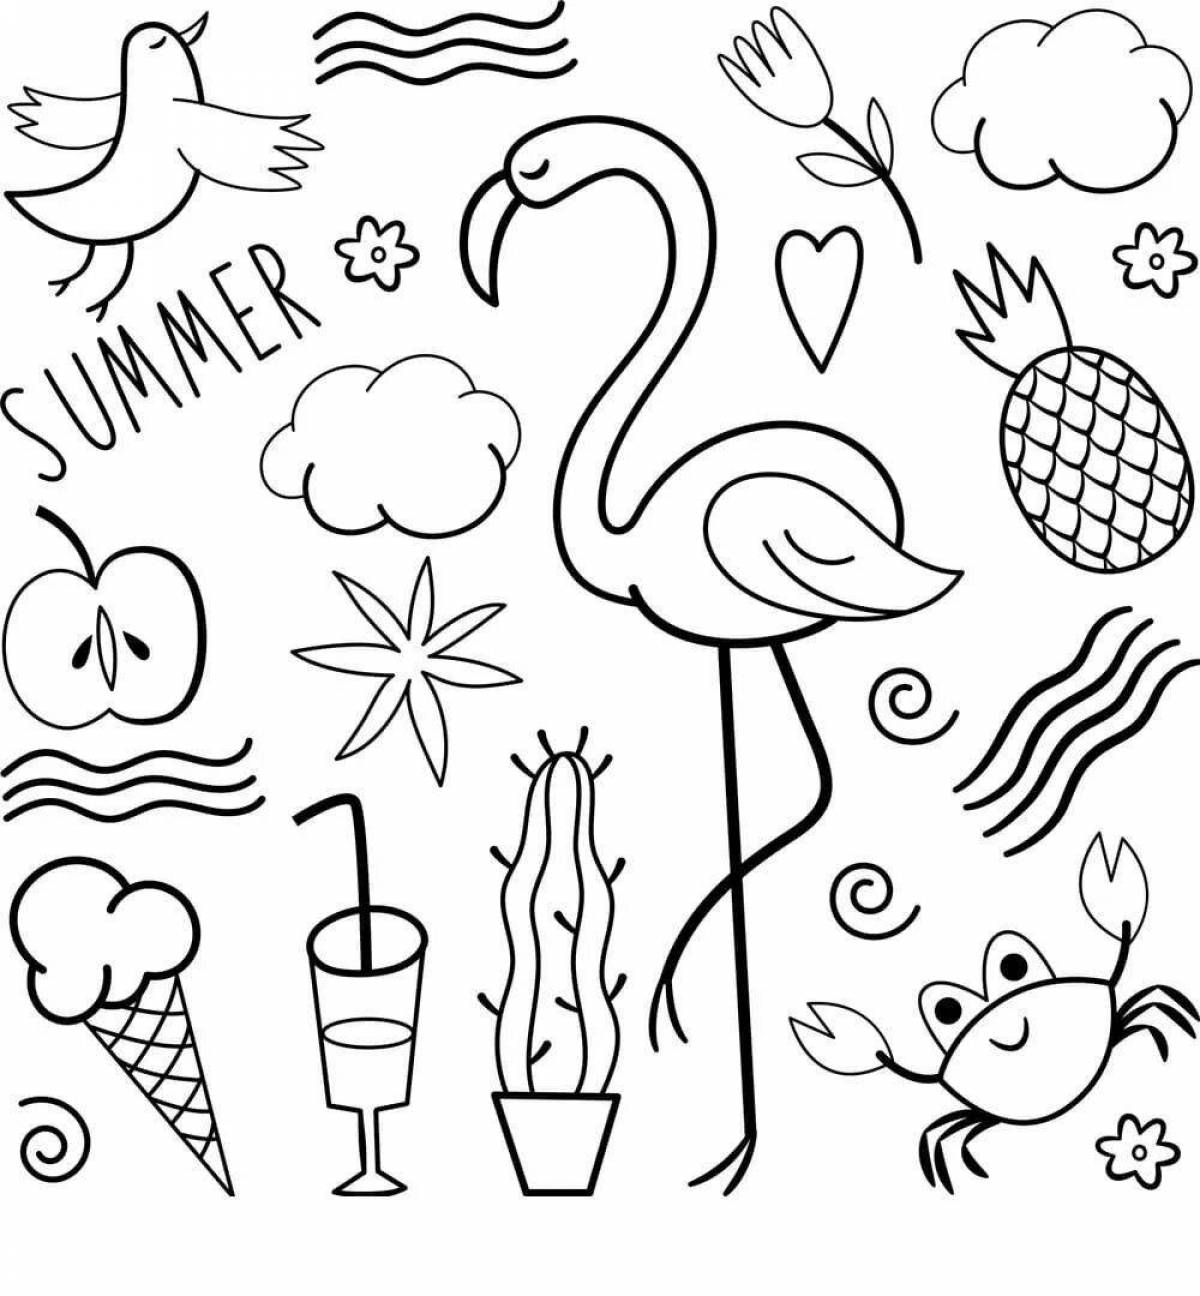 Creative coloring poster